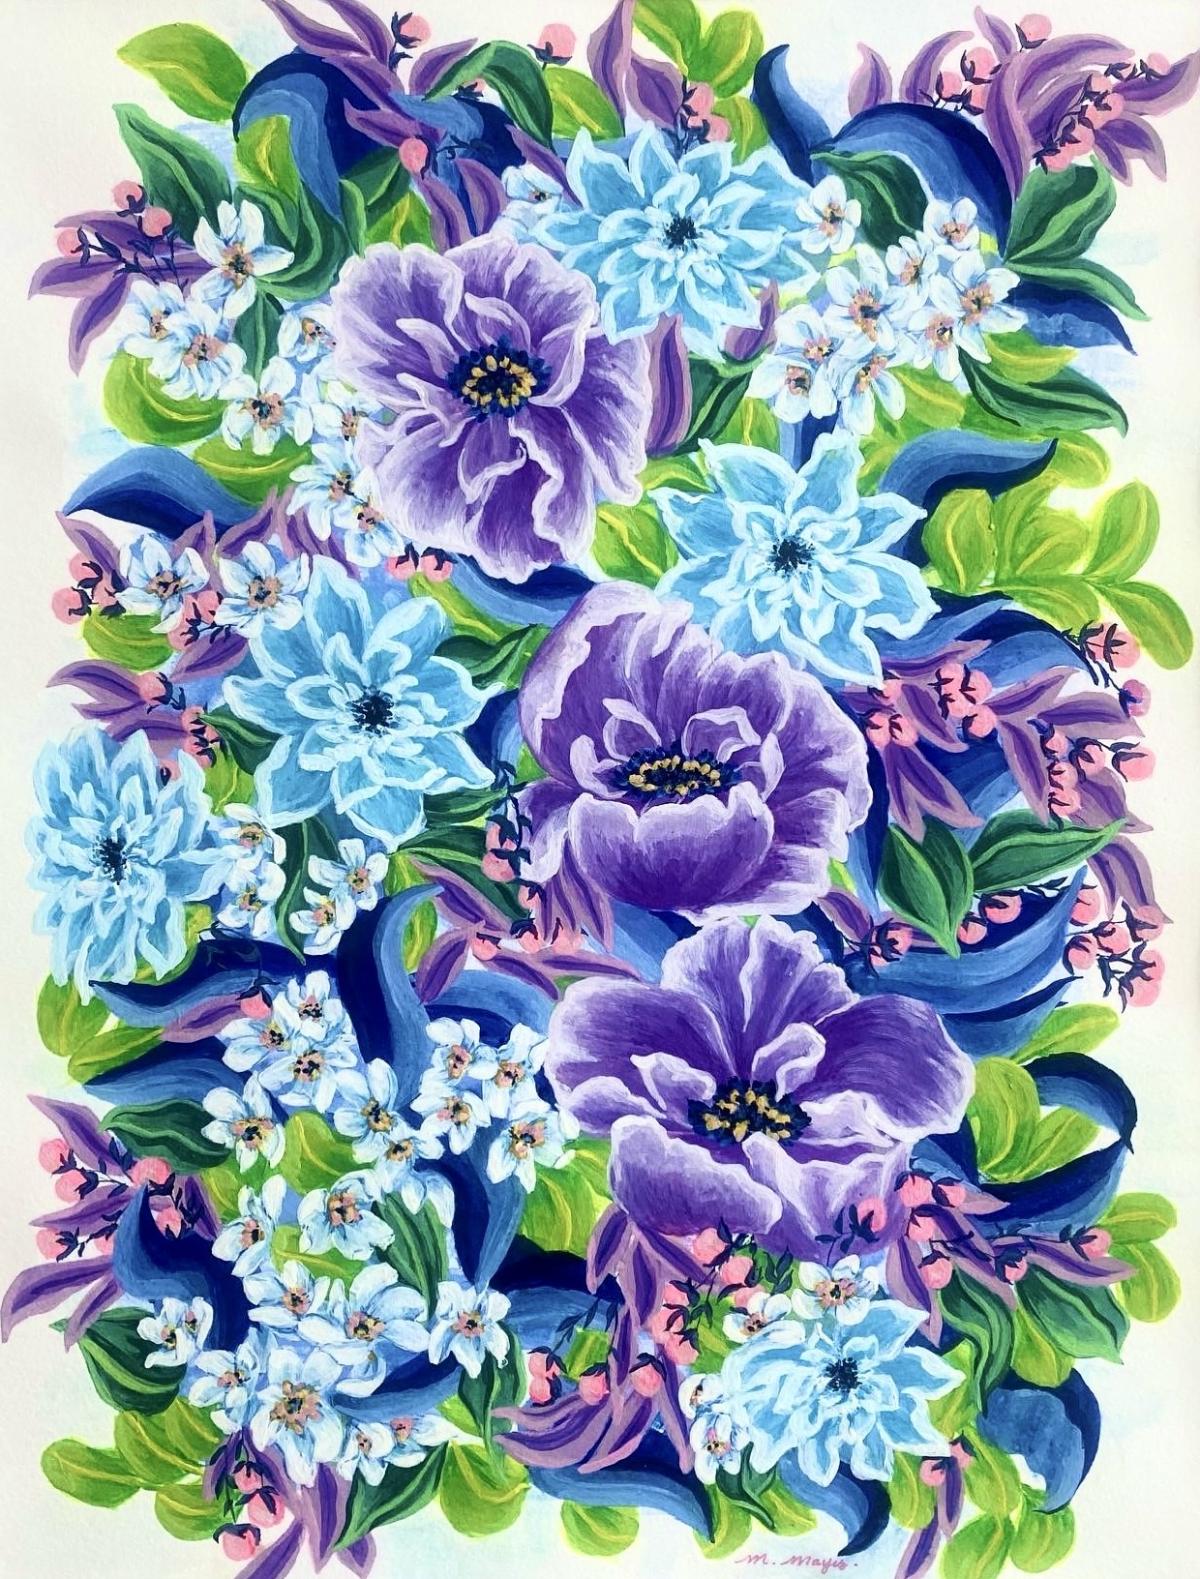 A floral gouache painting by Madeline.